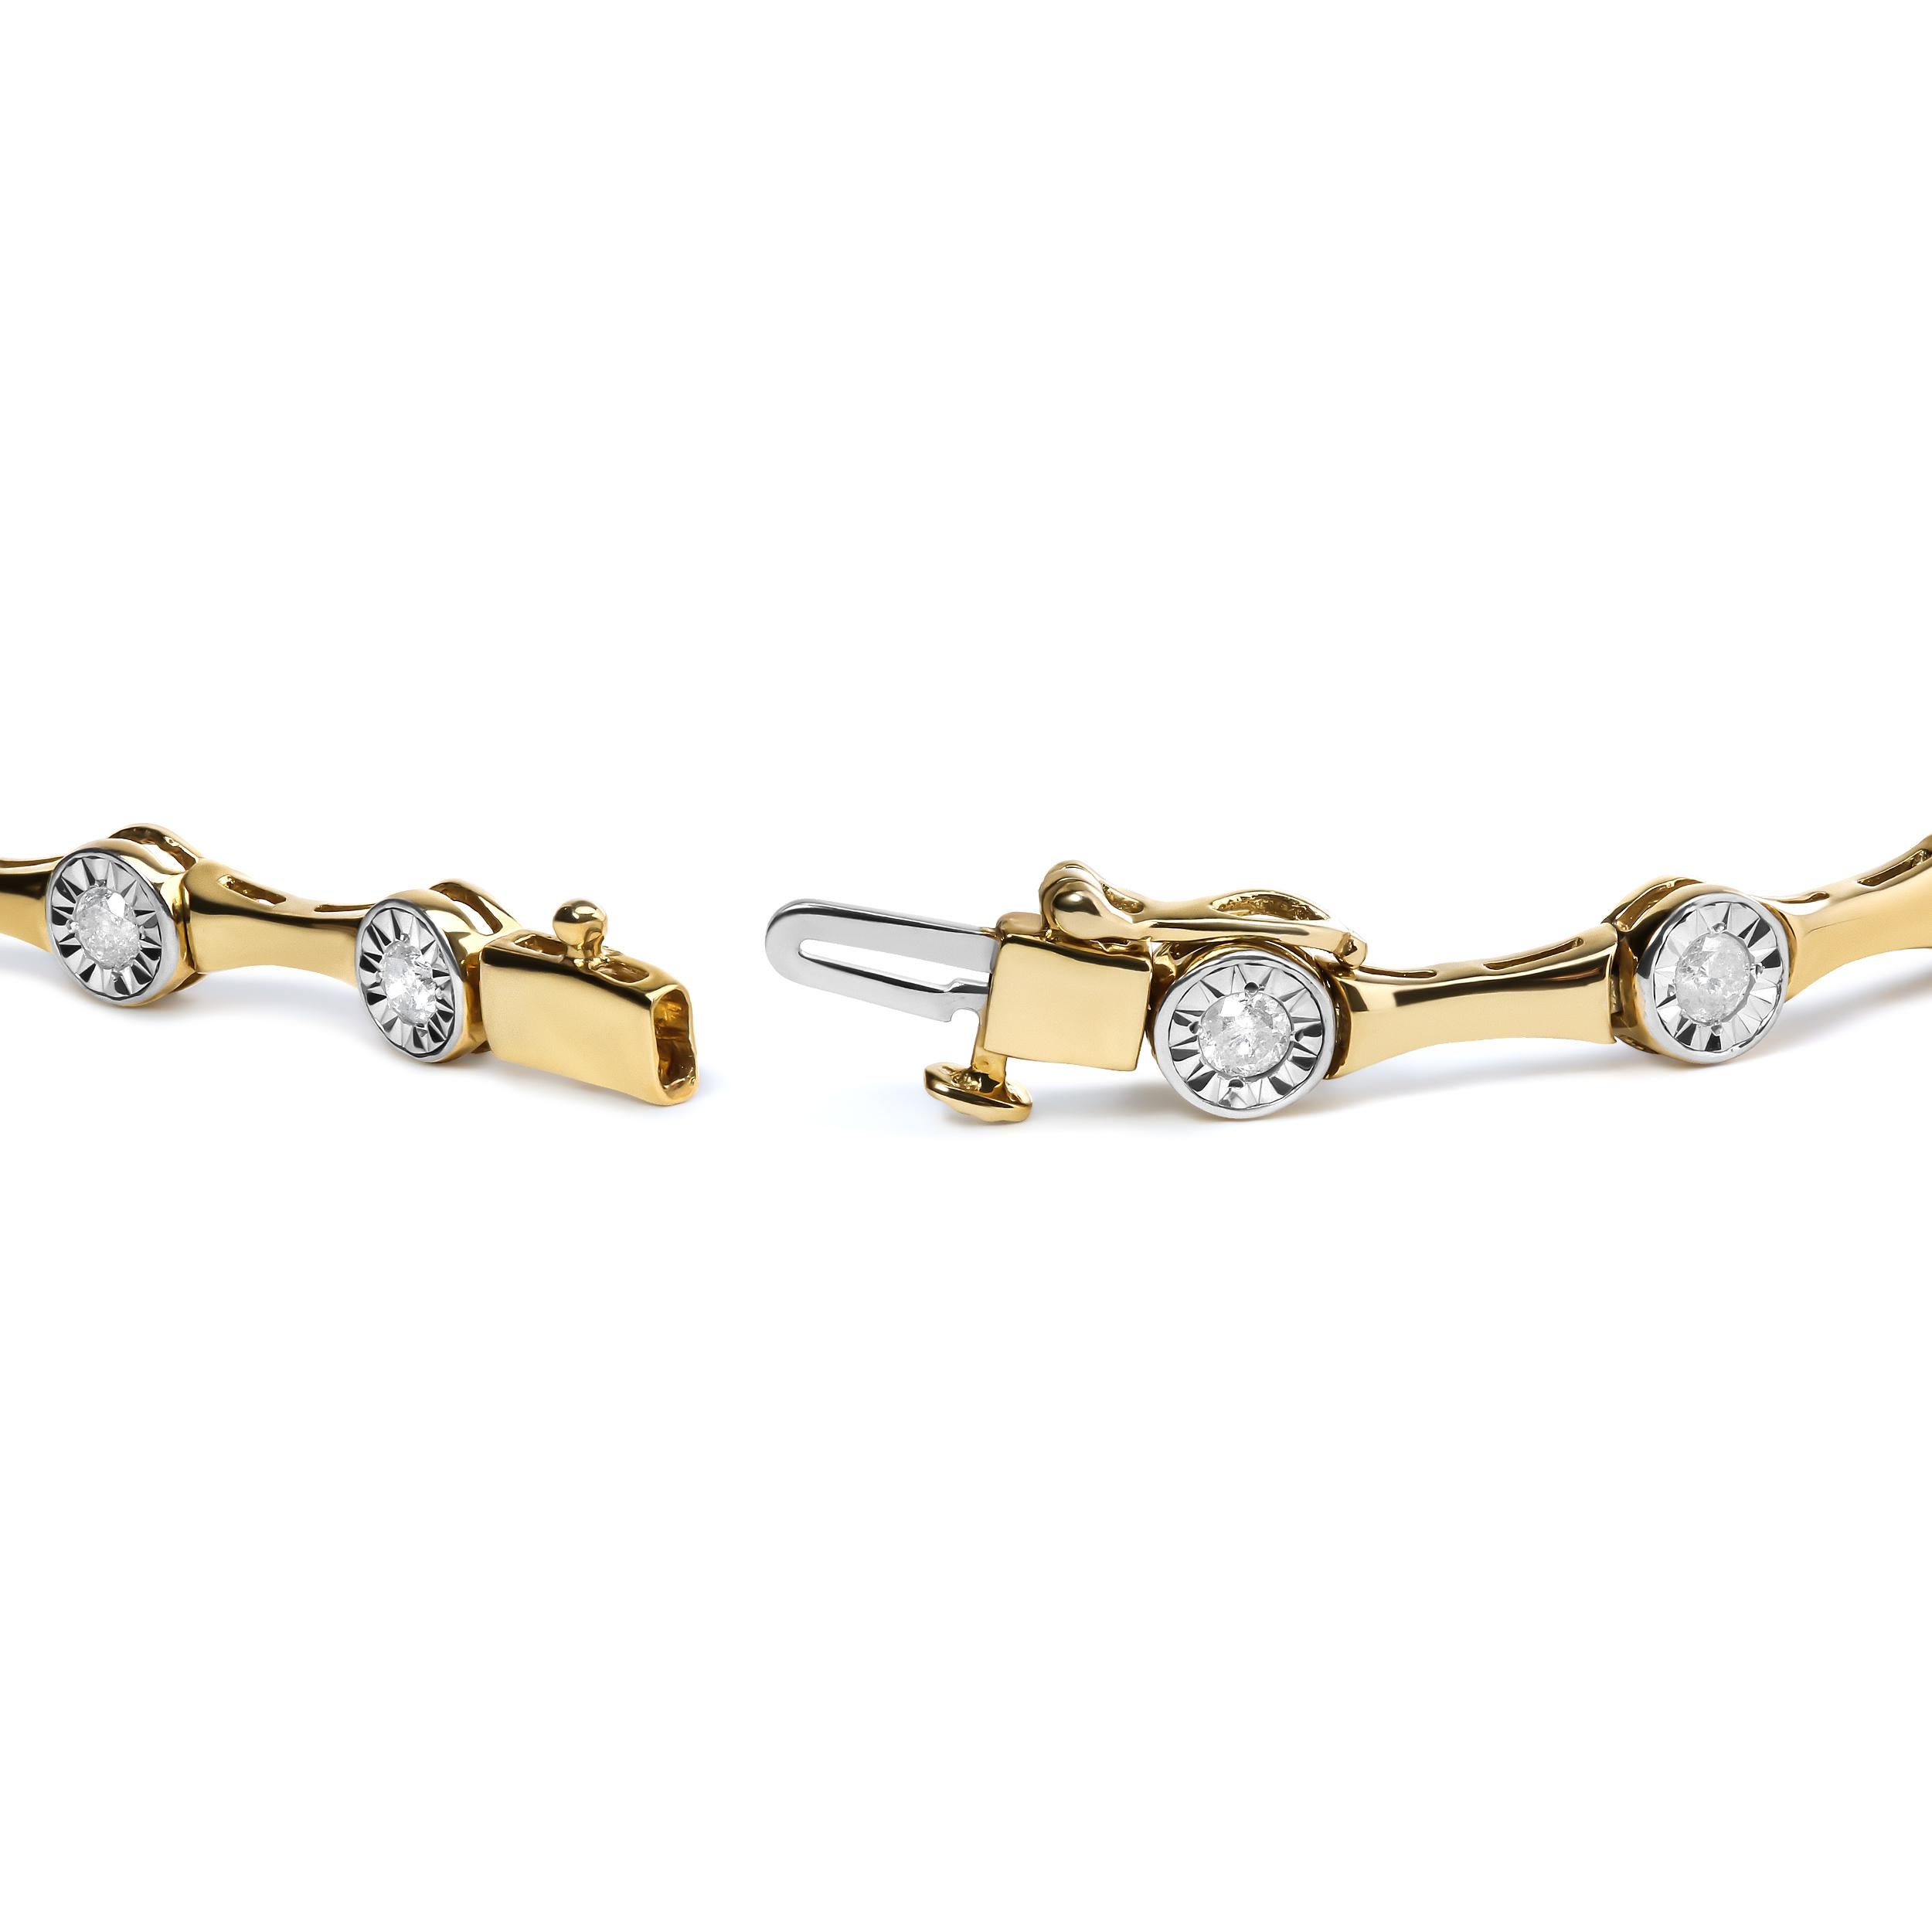 Adorn your wrist with the dazzling sparkle of diamonds. Crafted with care and precision, this bracelet is a true treasure. Plated with 10K yellow gold, the .925 sterling silver base shines with a warm, radiant glow. The round cut diamonds, with a